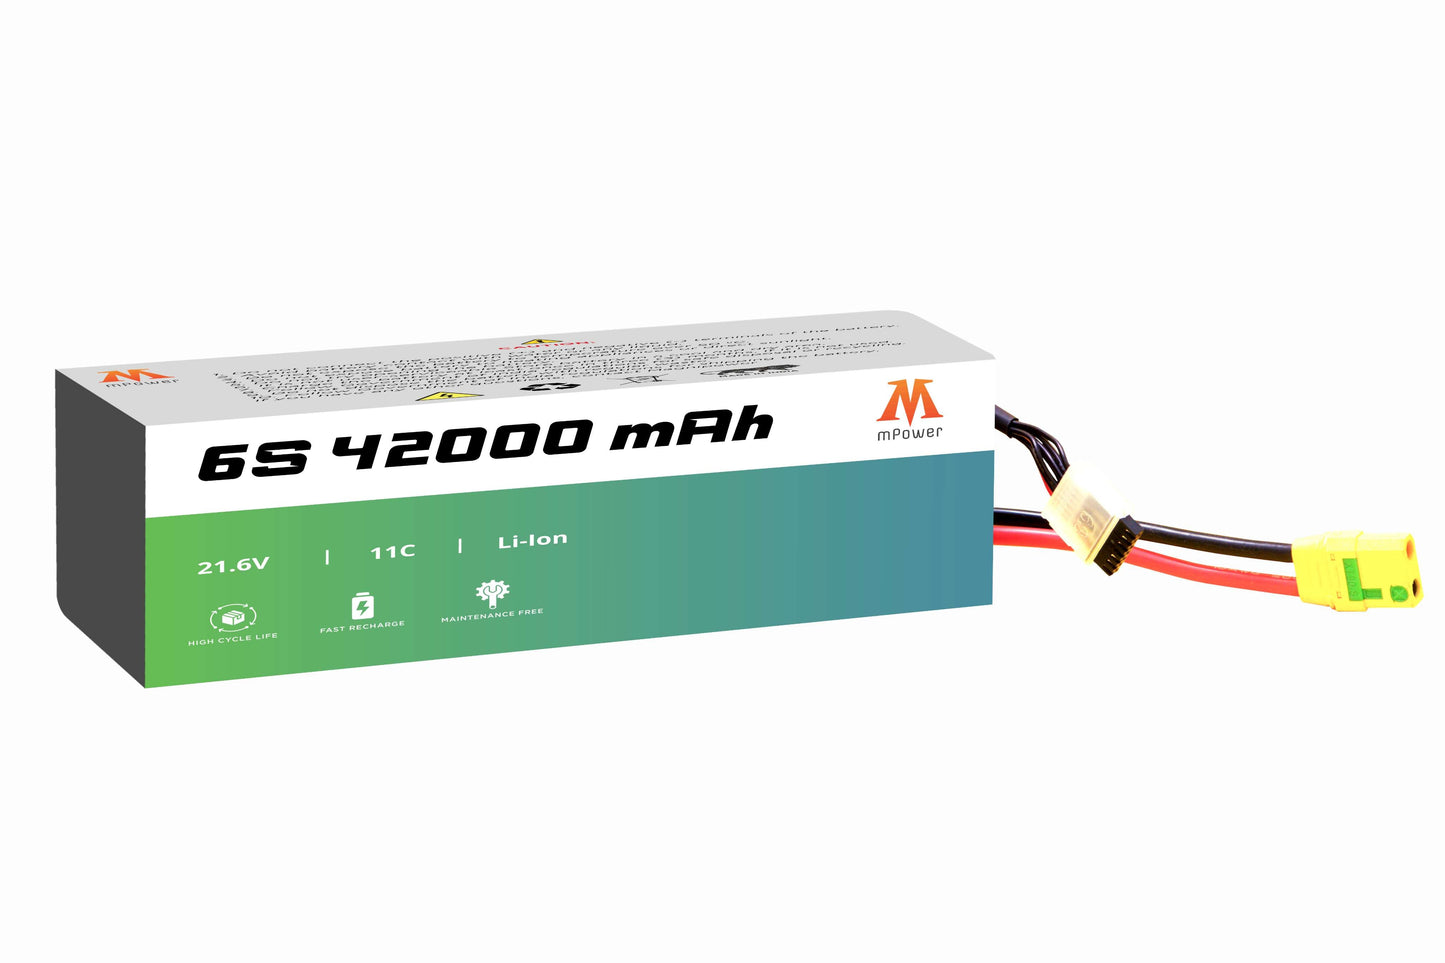 mPower 6S 42000mAh Lithium-Ion Battery for Delivery Drones